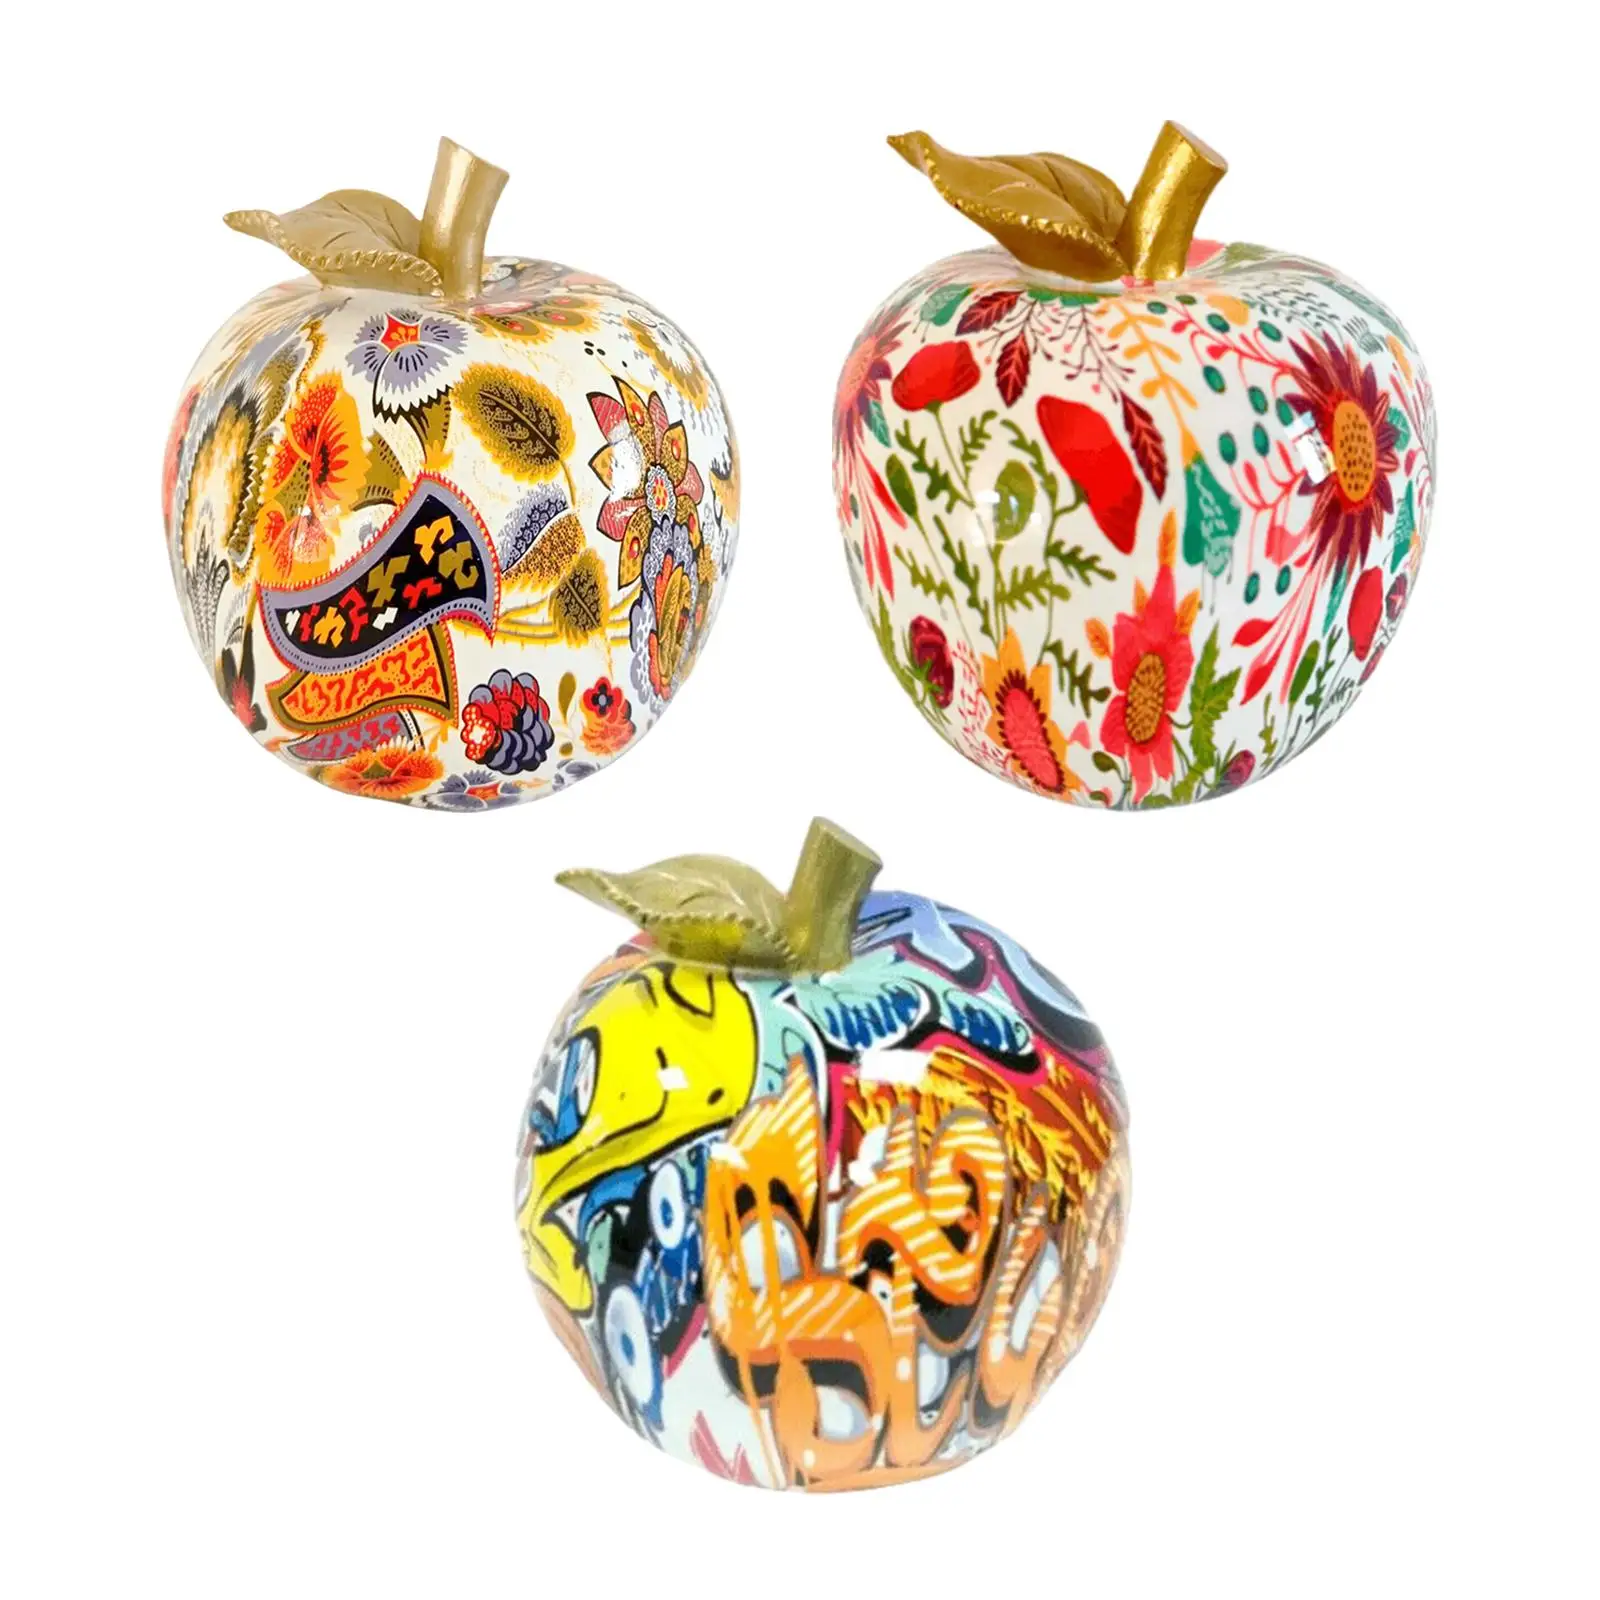 Graffiti Apple Statues Home Decoration Collectible Simulation Fruits Sculpture for Wedding Birthday Bookshelf Entry